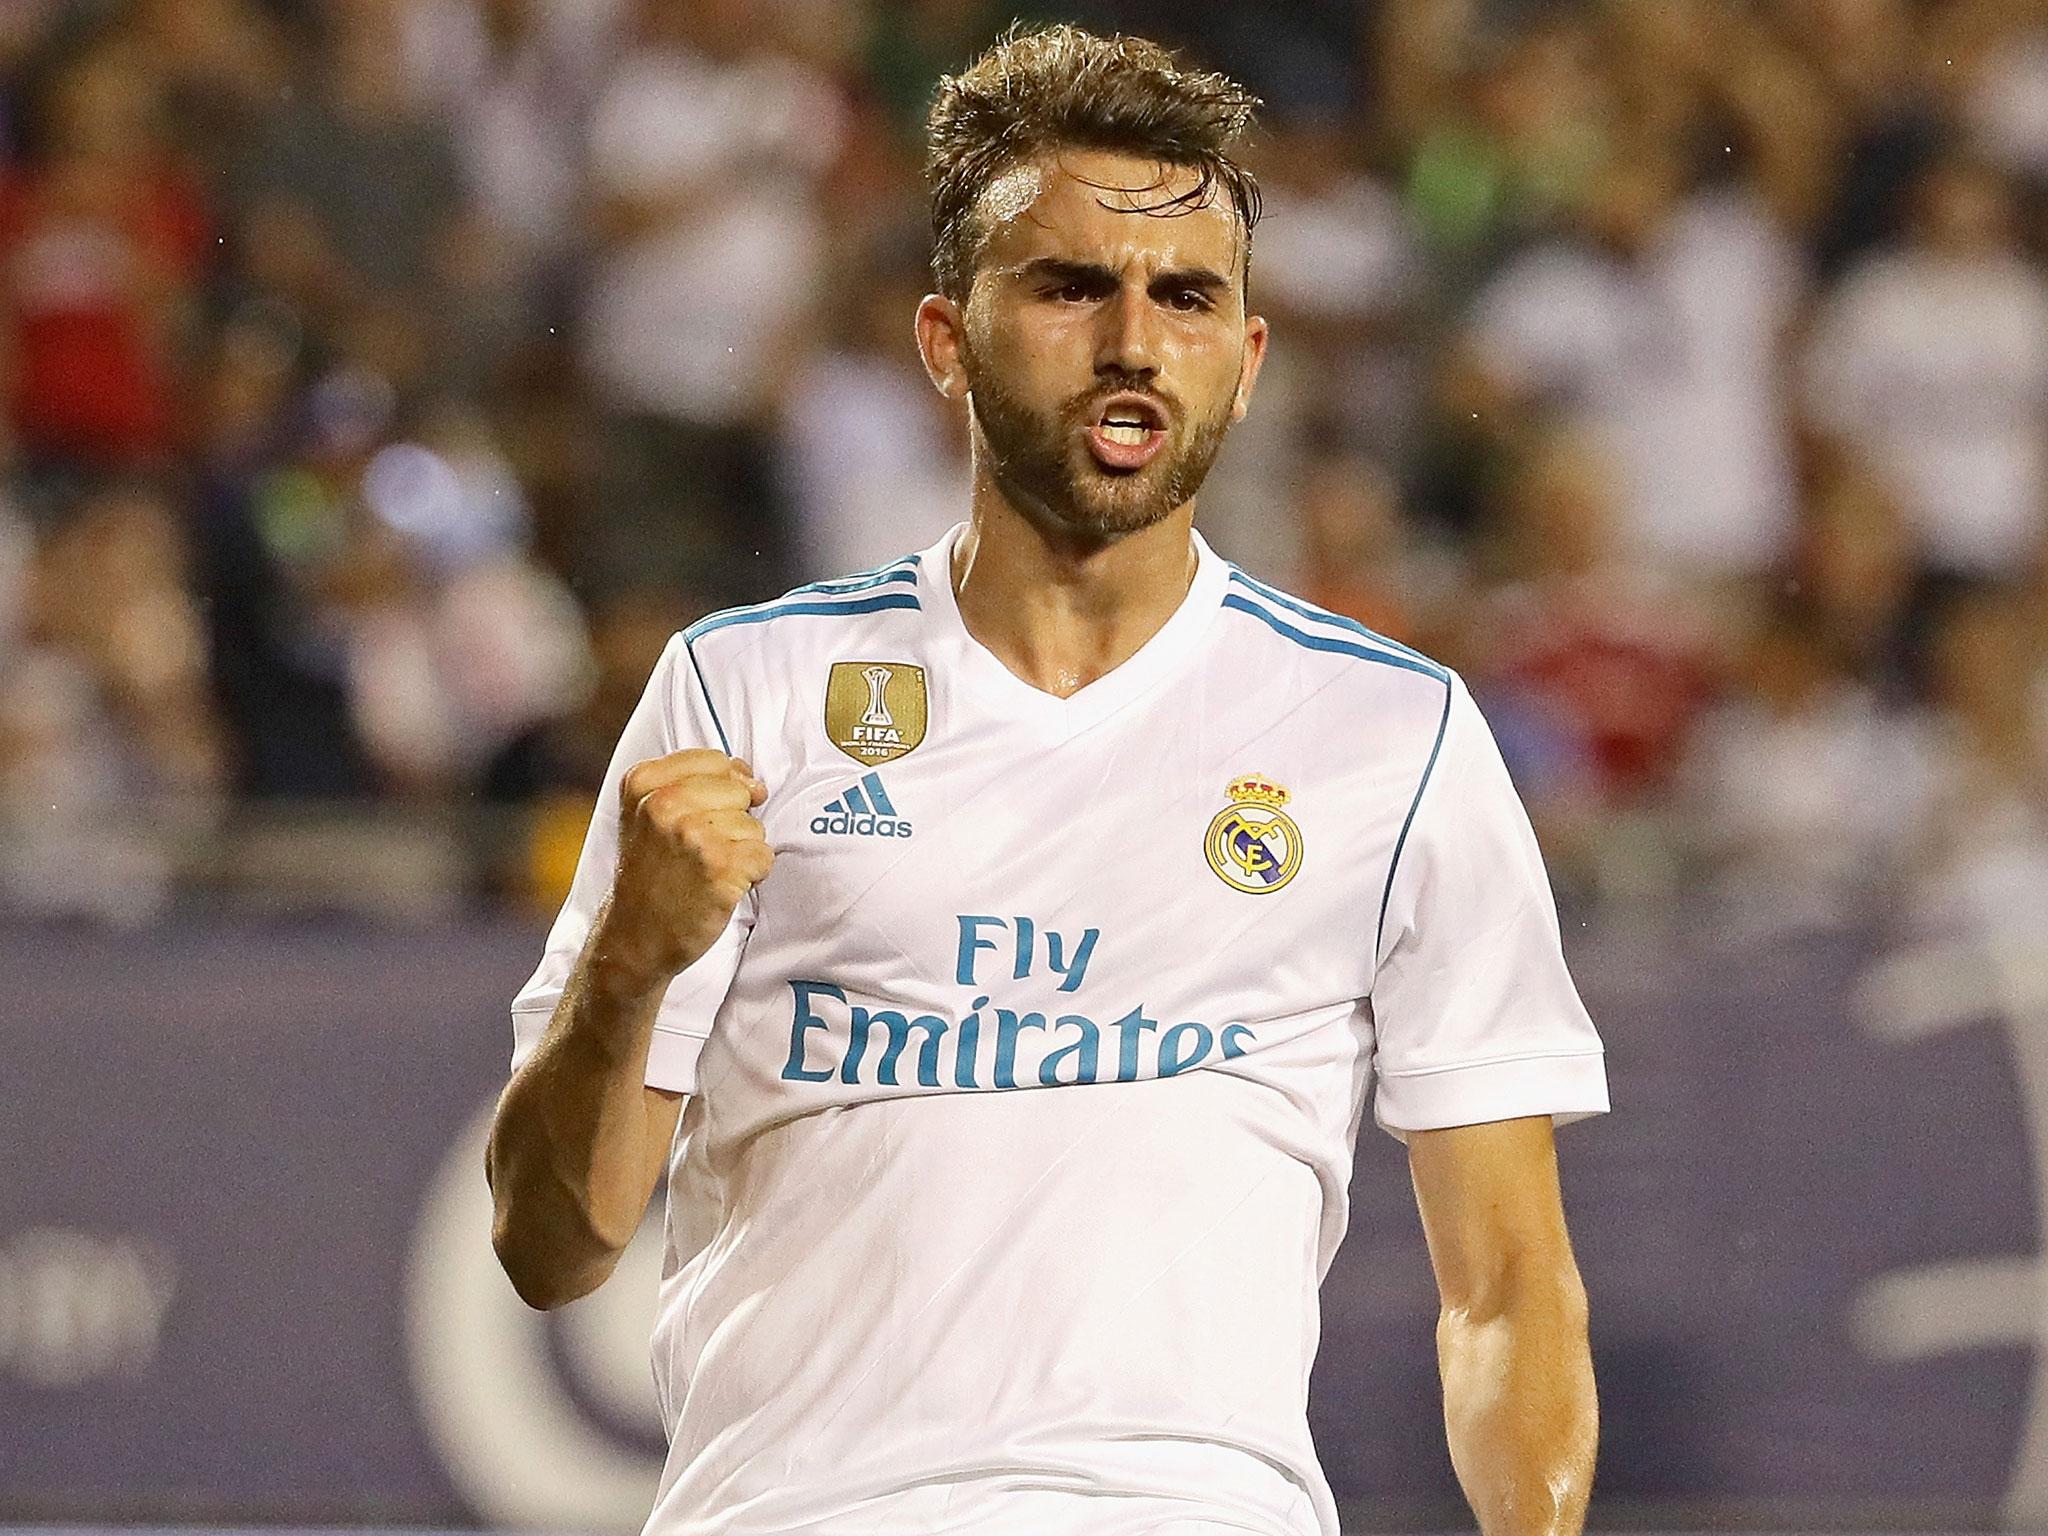 Borja Mayoral put Real Madrid ahead only for Dom Dwyer to equalise late on